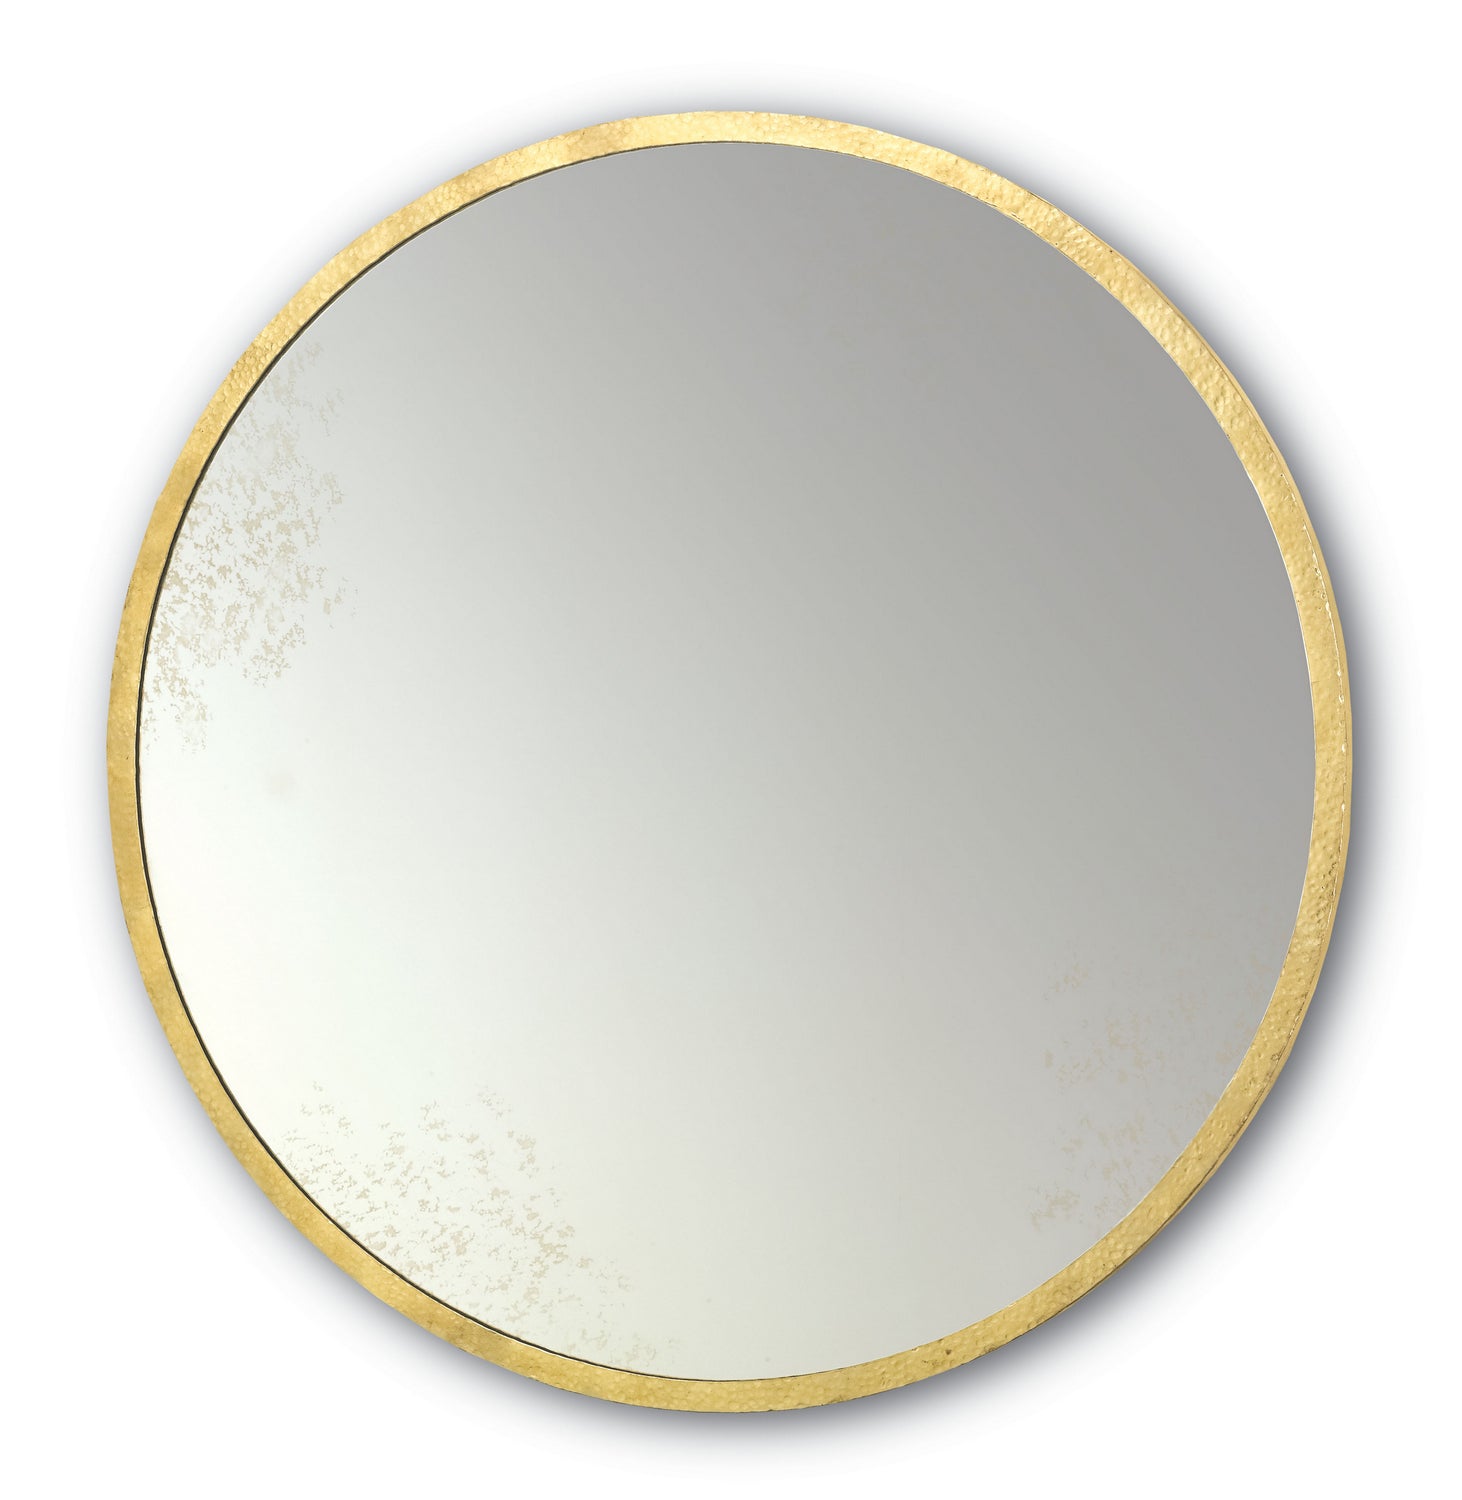 Mirror from the Aline collection in Contemporary Gold Leaf/Antique Mirror finish